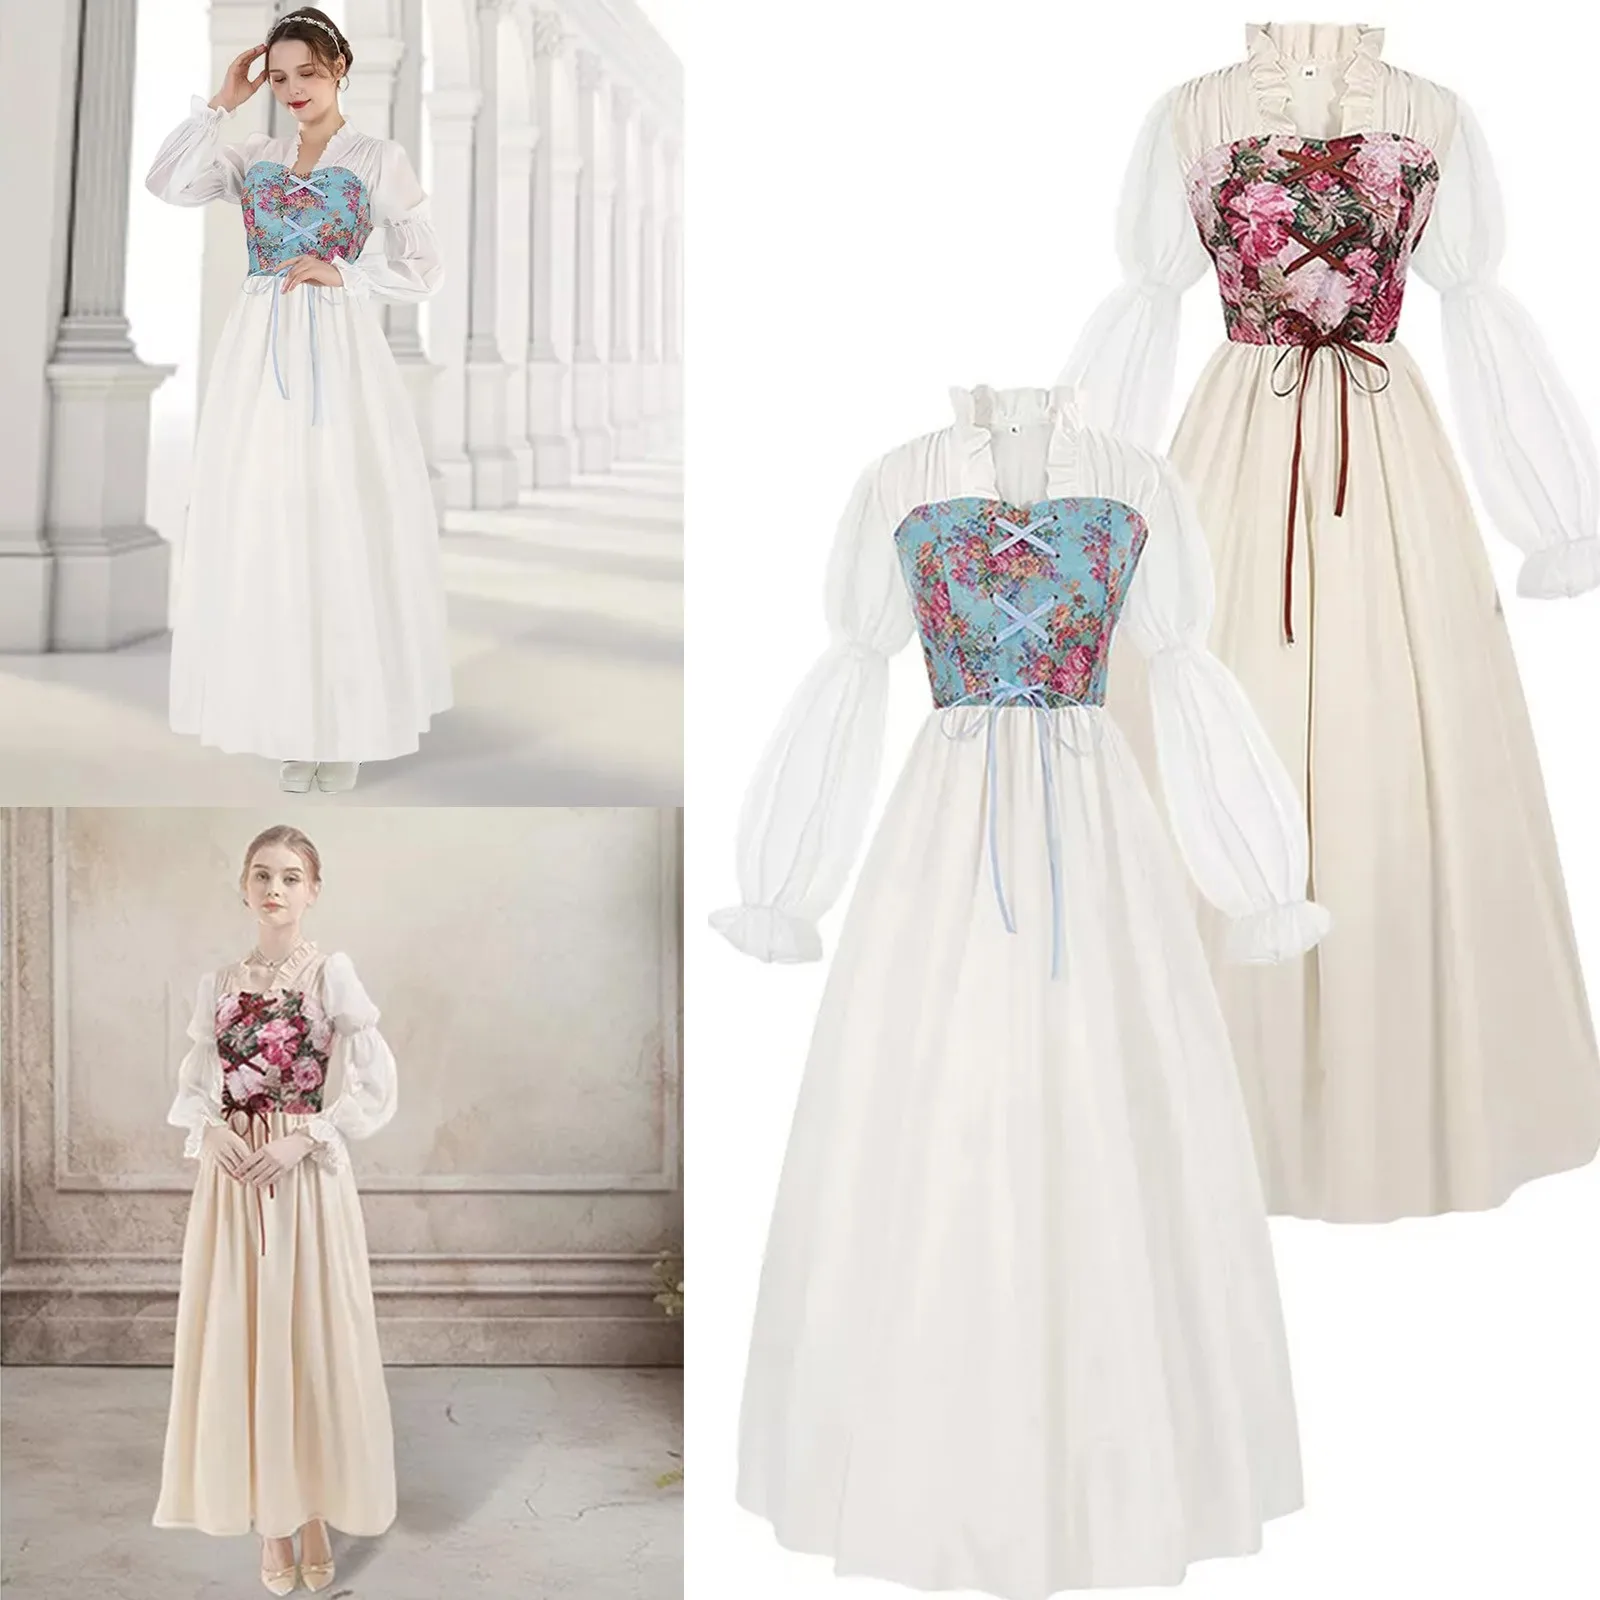 Gothic Medieval Dress Women Vintage Long Sleeve Sweetheart Dress Solid Court Style Dresses Formal Banquet Prom Party Dresses